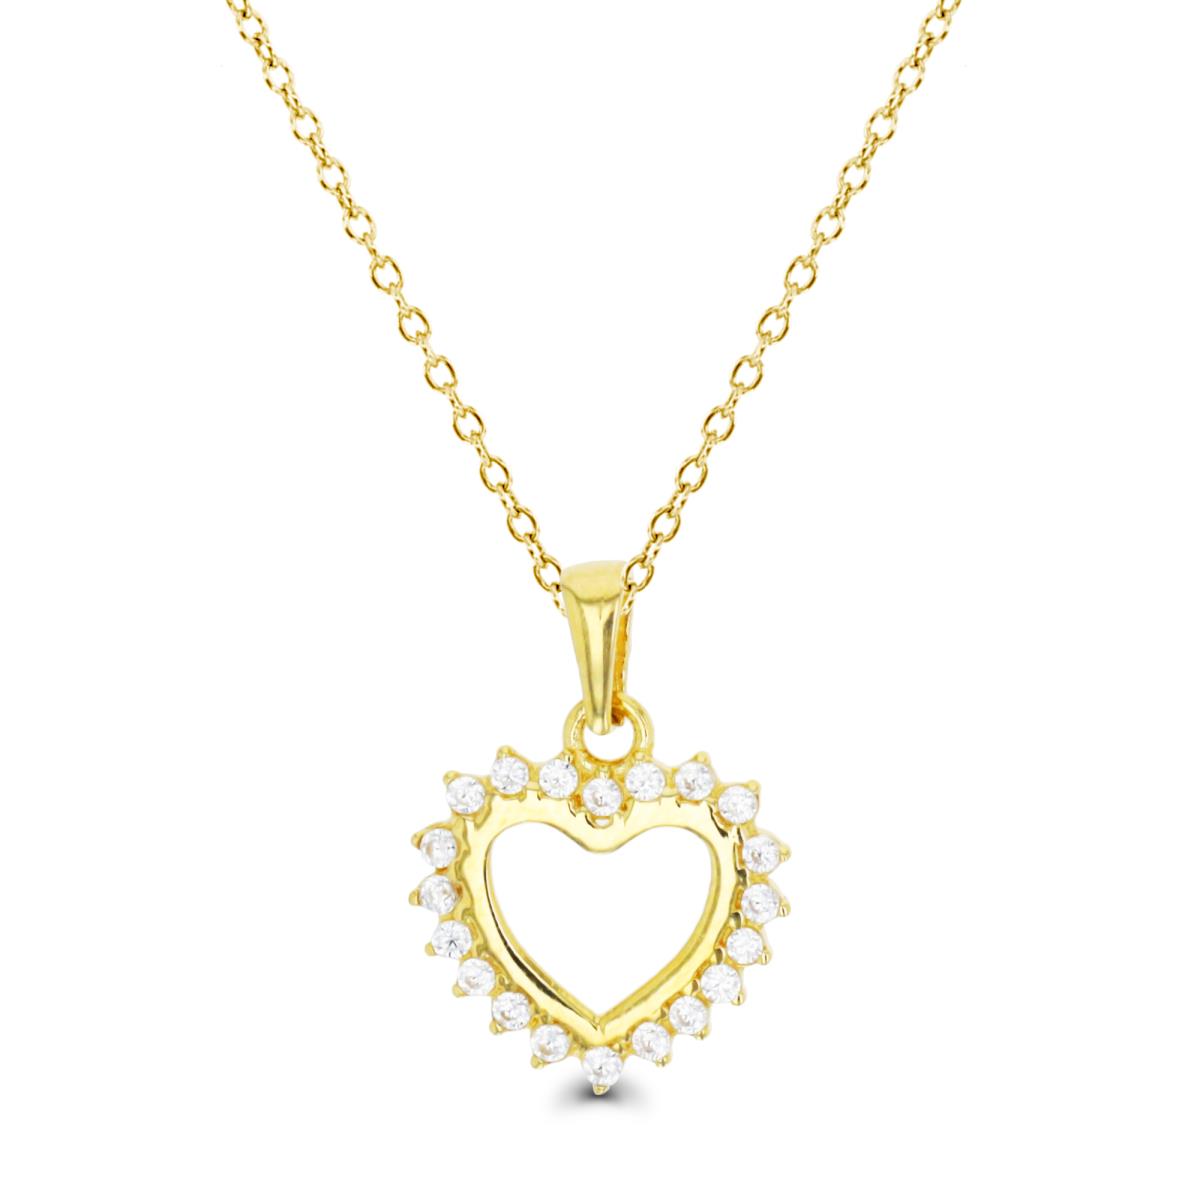 10K Yellow Gold Open Heart 18" Necklace